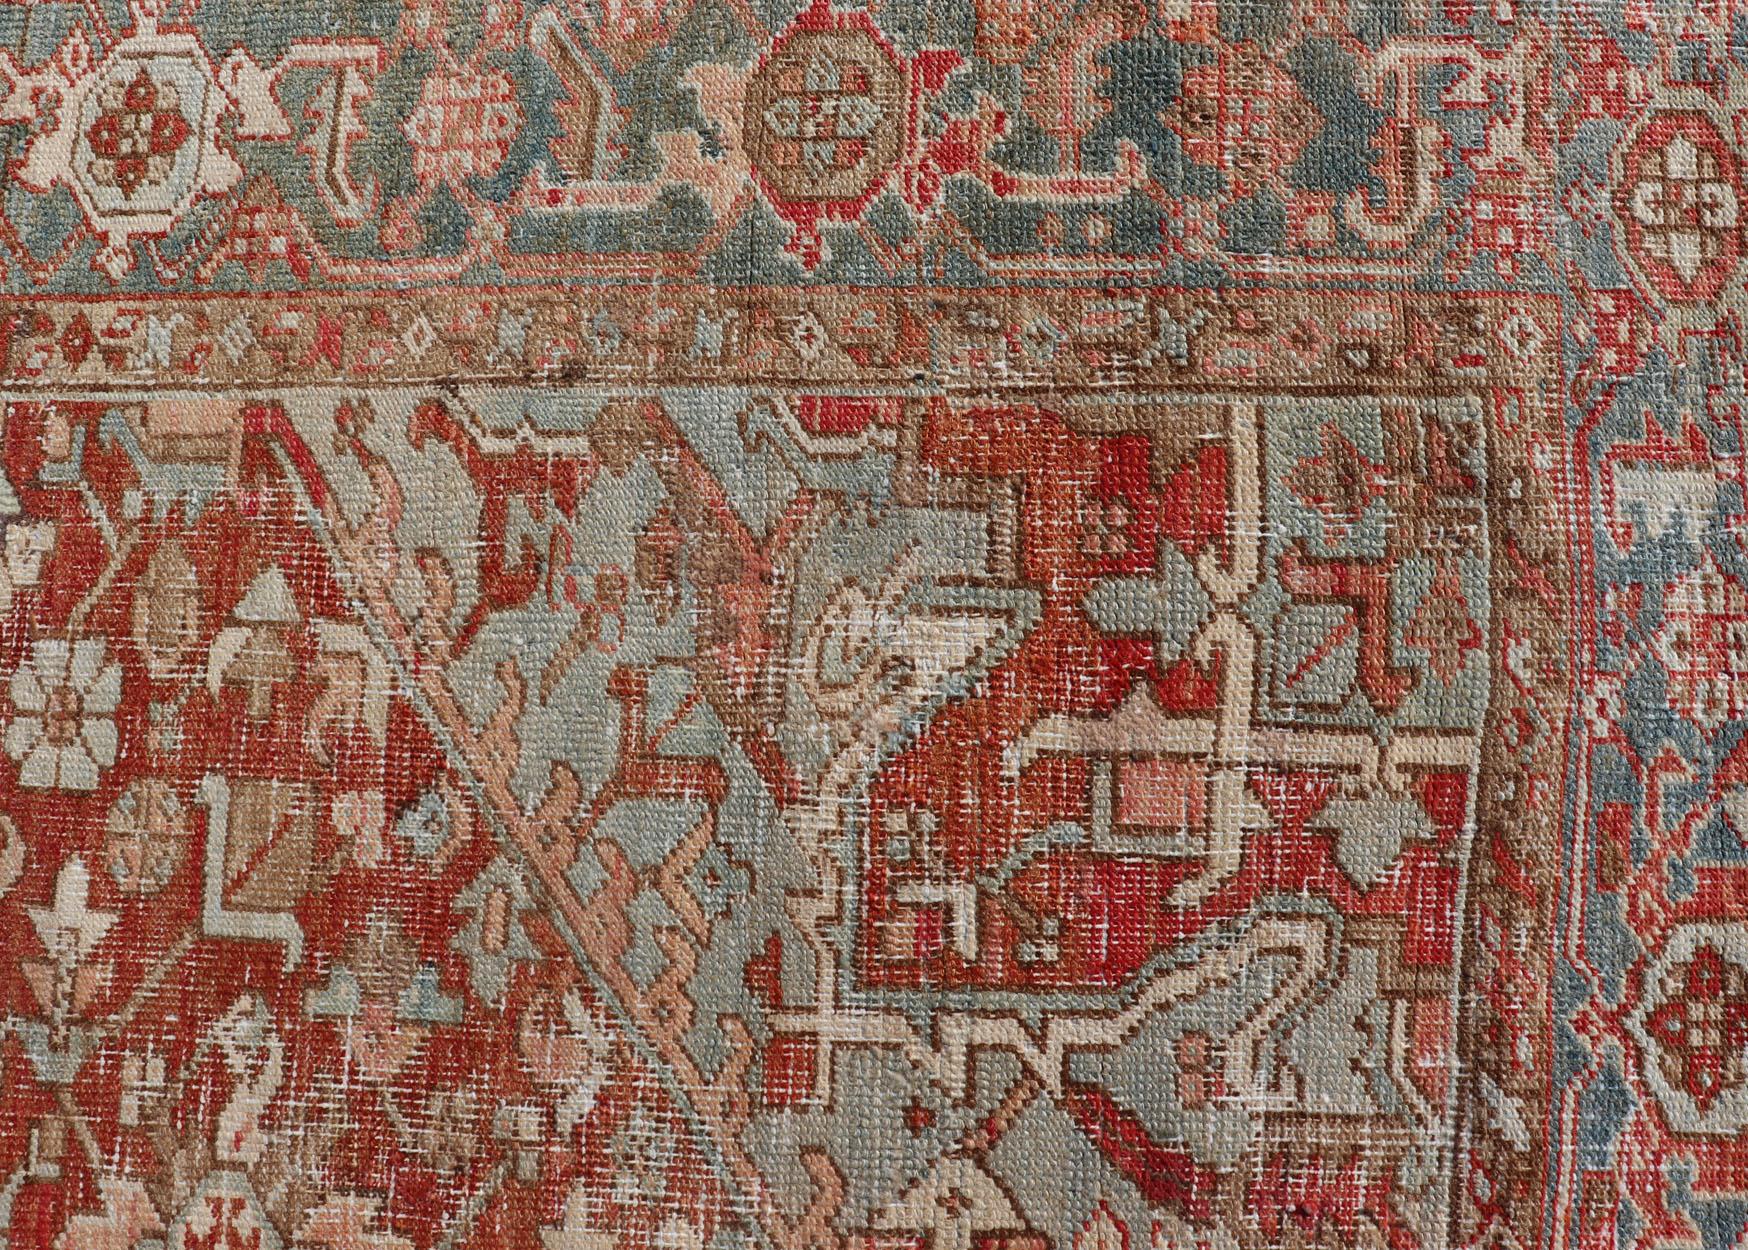 Antique Heriz Rug with All-Over Medallion Design in Red, Blue, Pink, Tan & Brown For Sale 3